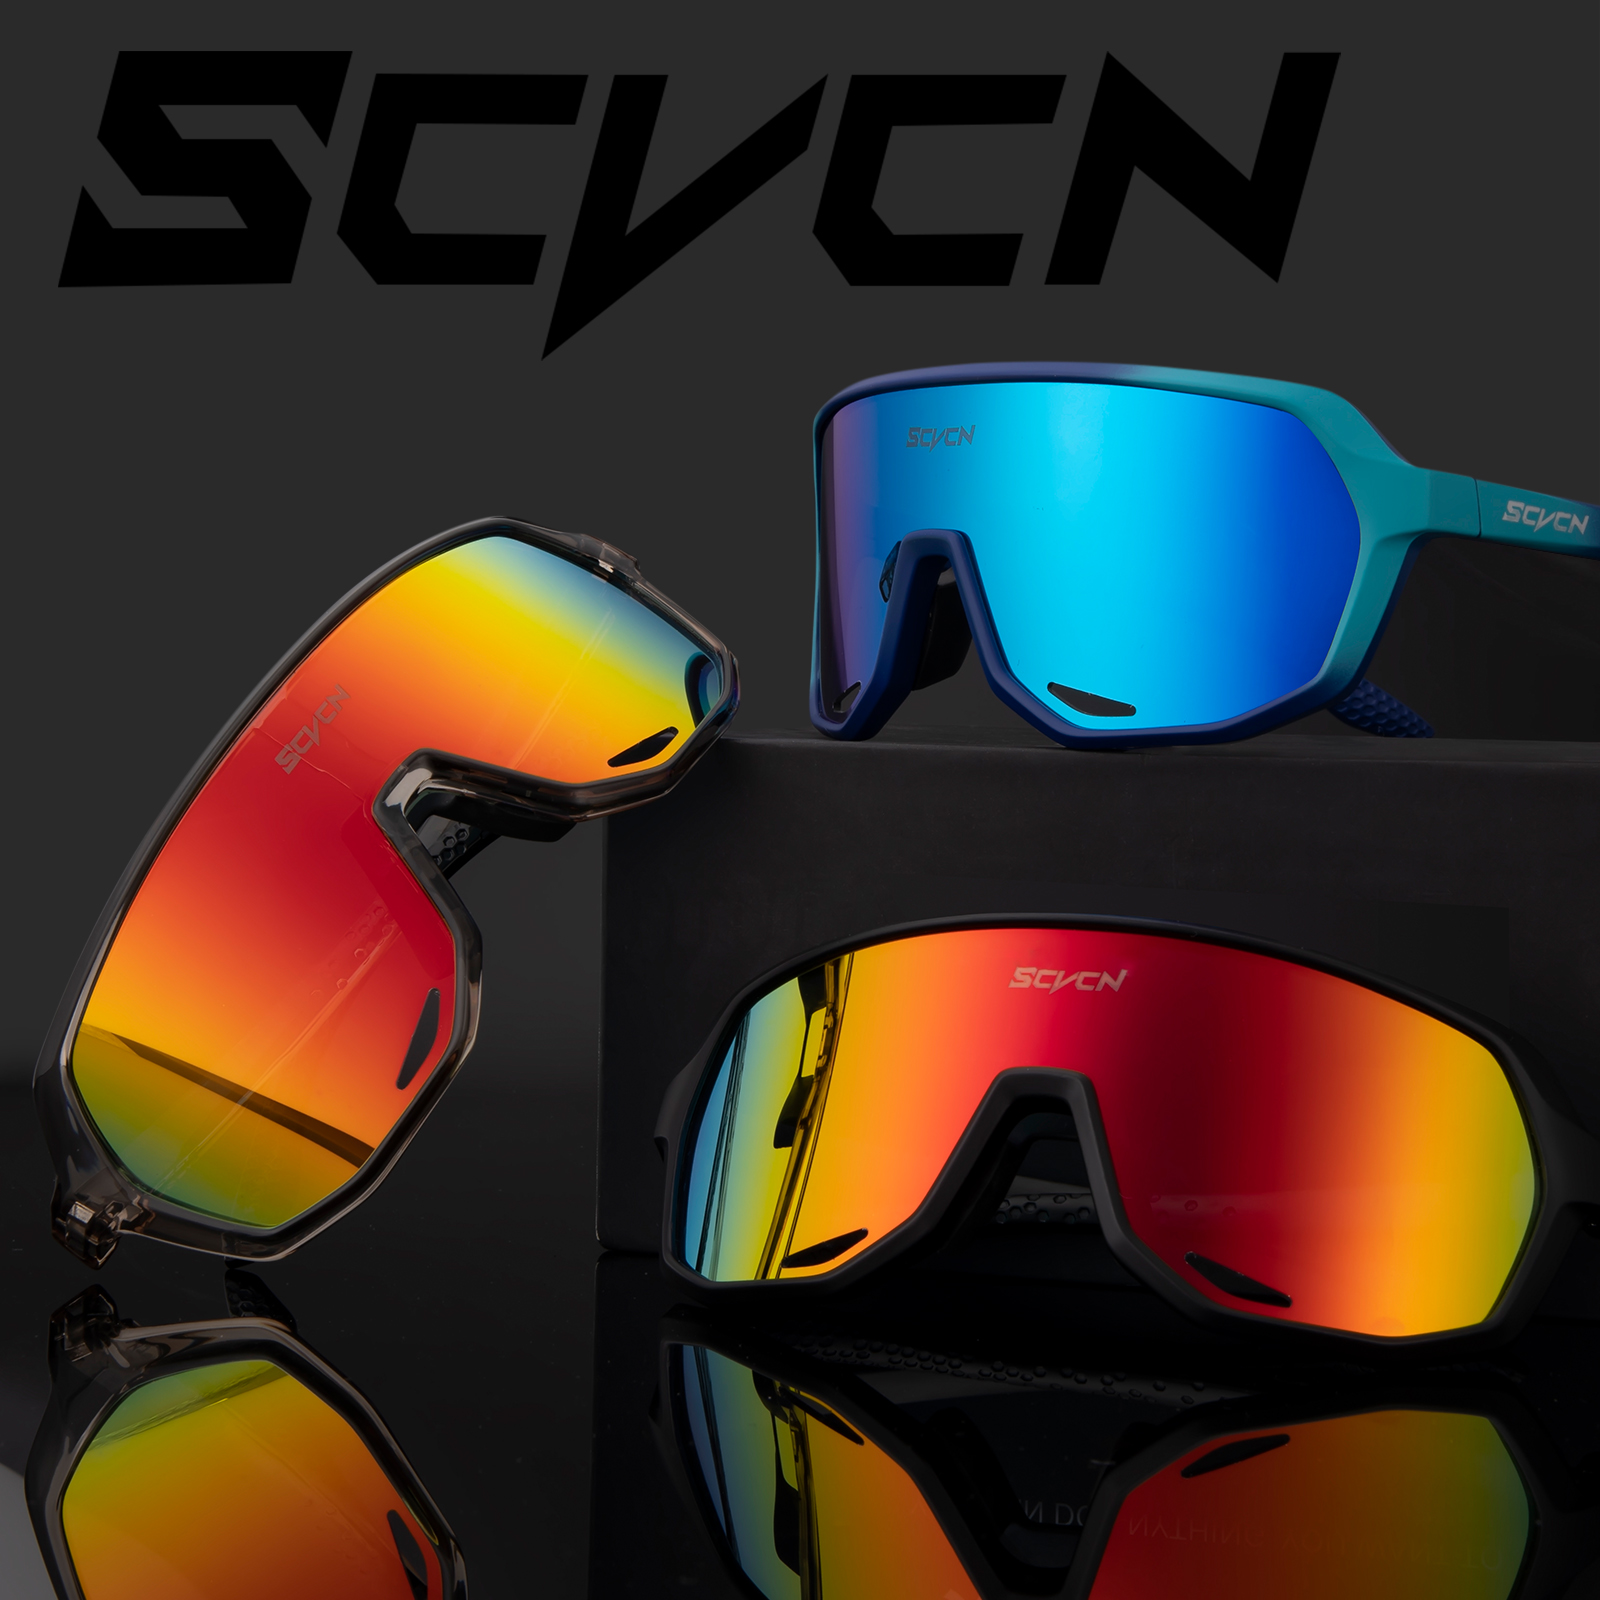 SCVCN Cycling Glasses Polarized with 3 Interchangeable Lenses for Men Women UV400 Protection MTB Bike Running Driving Fishing Golf Cycle 09